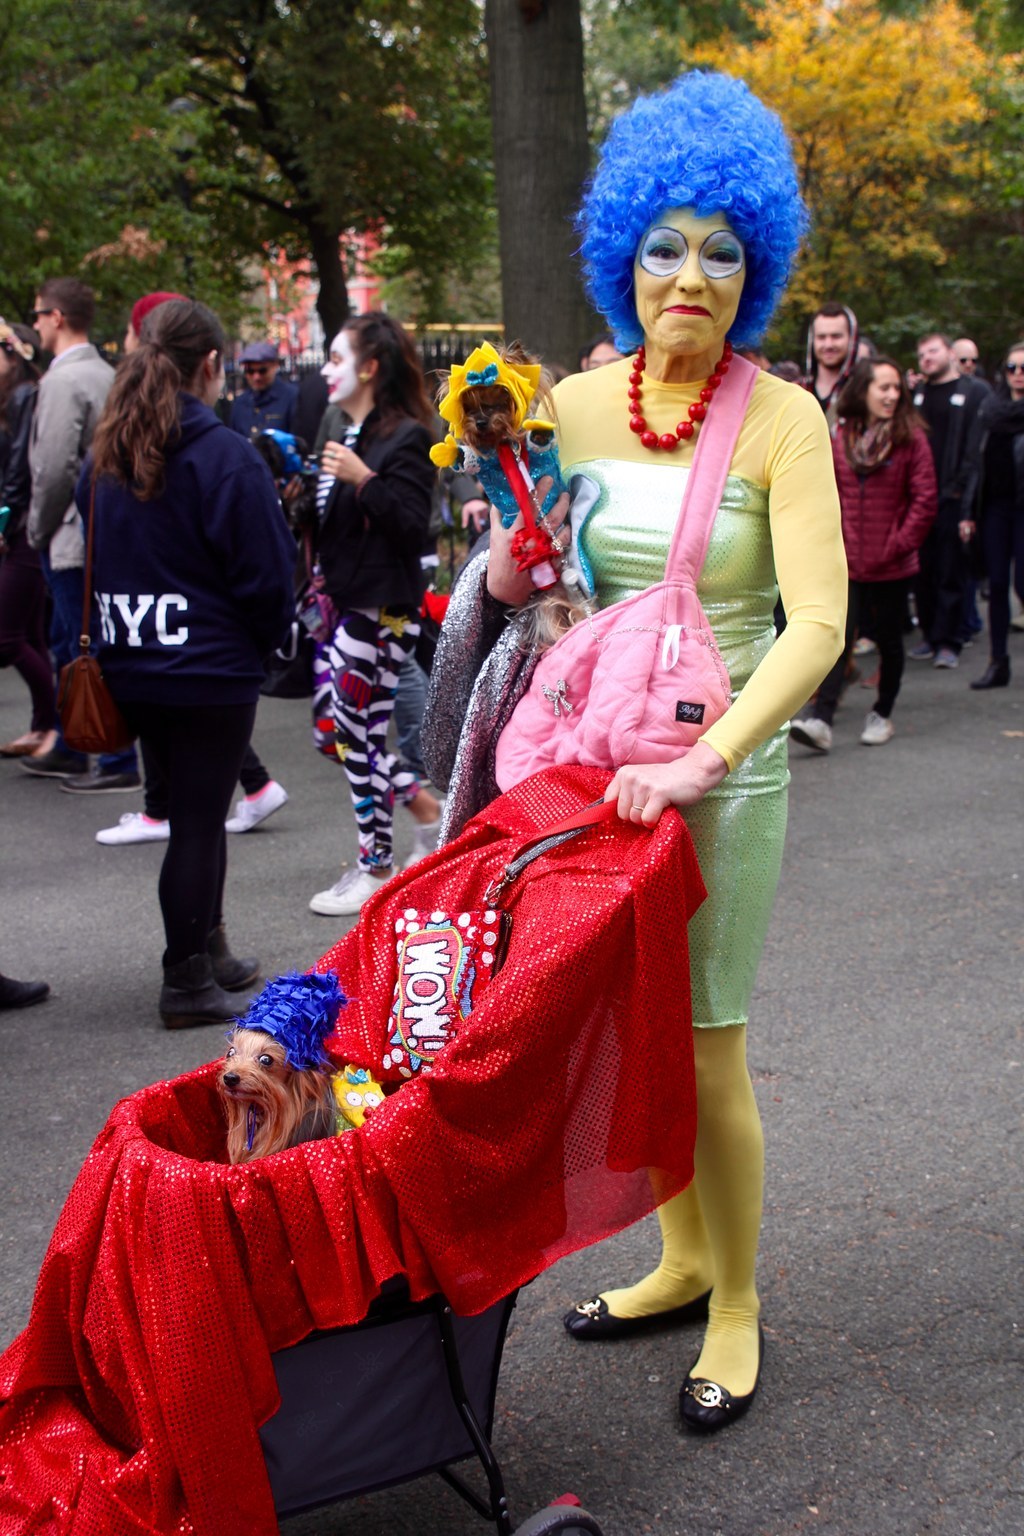 26 Inspiring Dogs From NYC's Biggest Halloween Parade